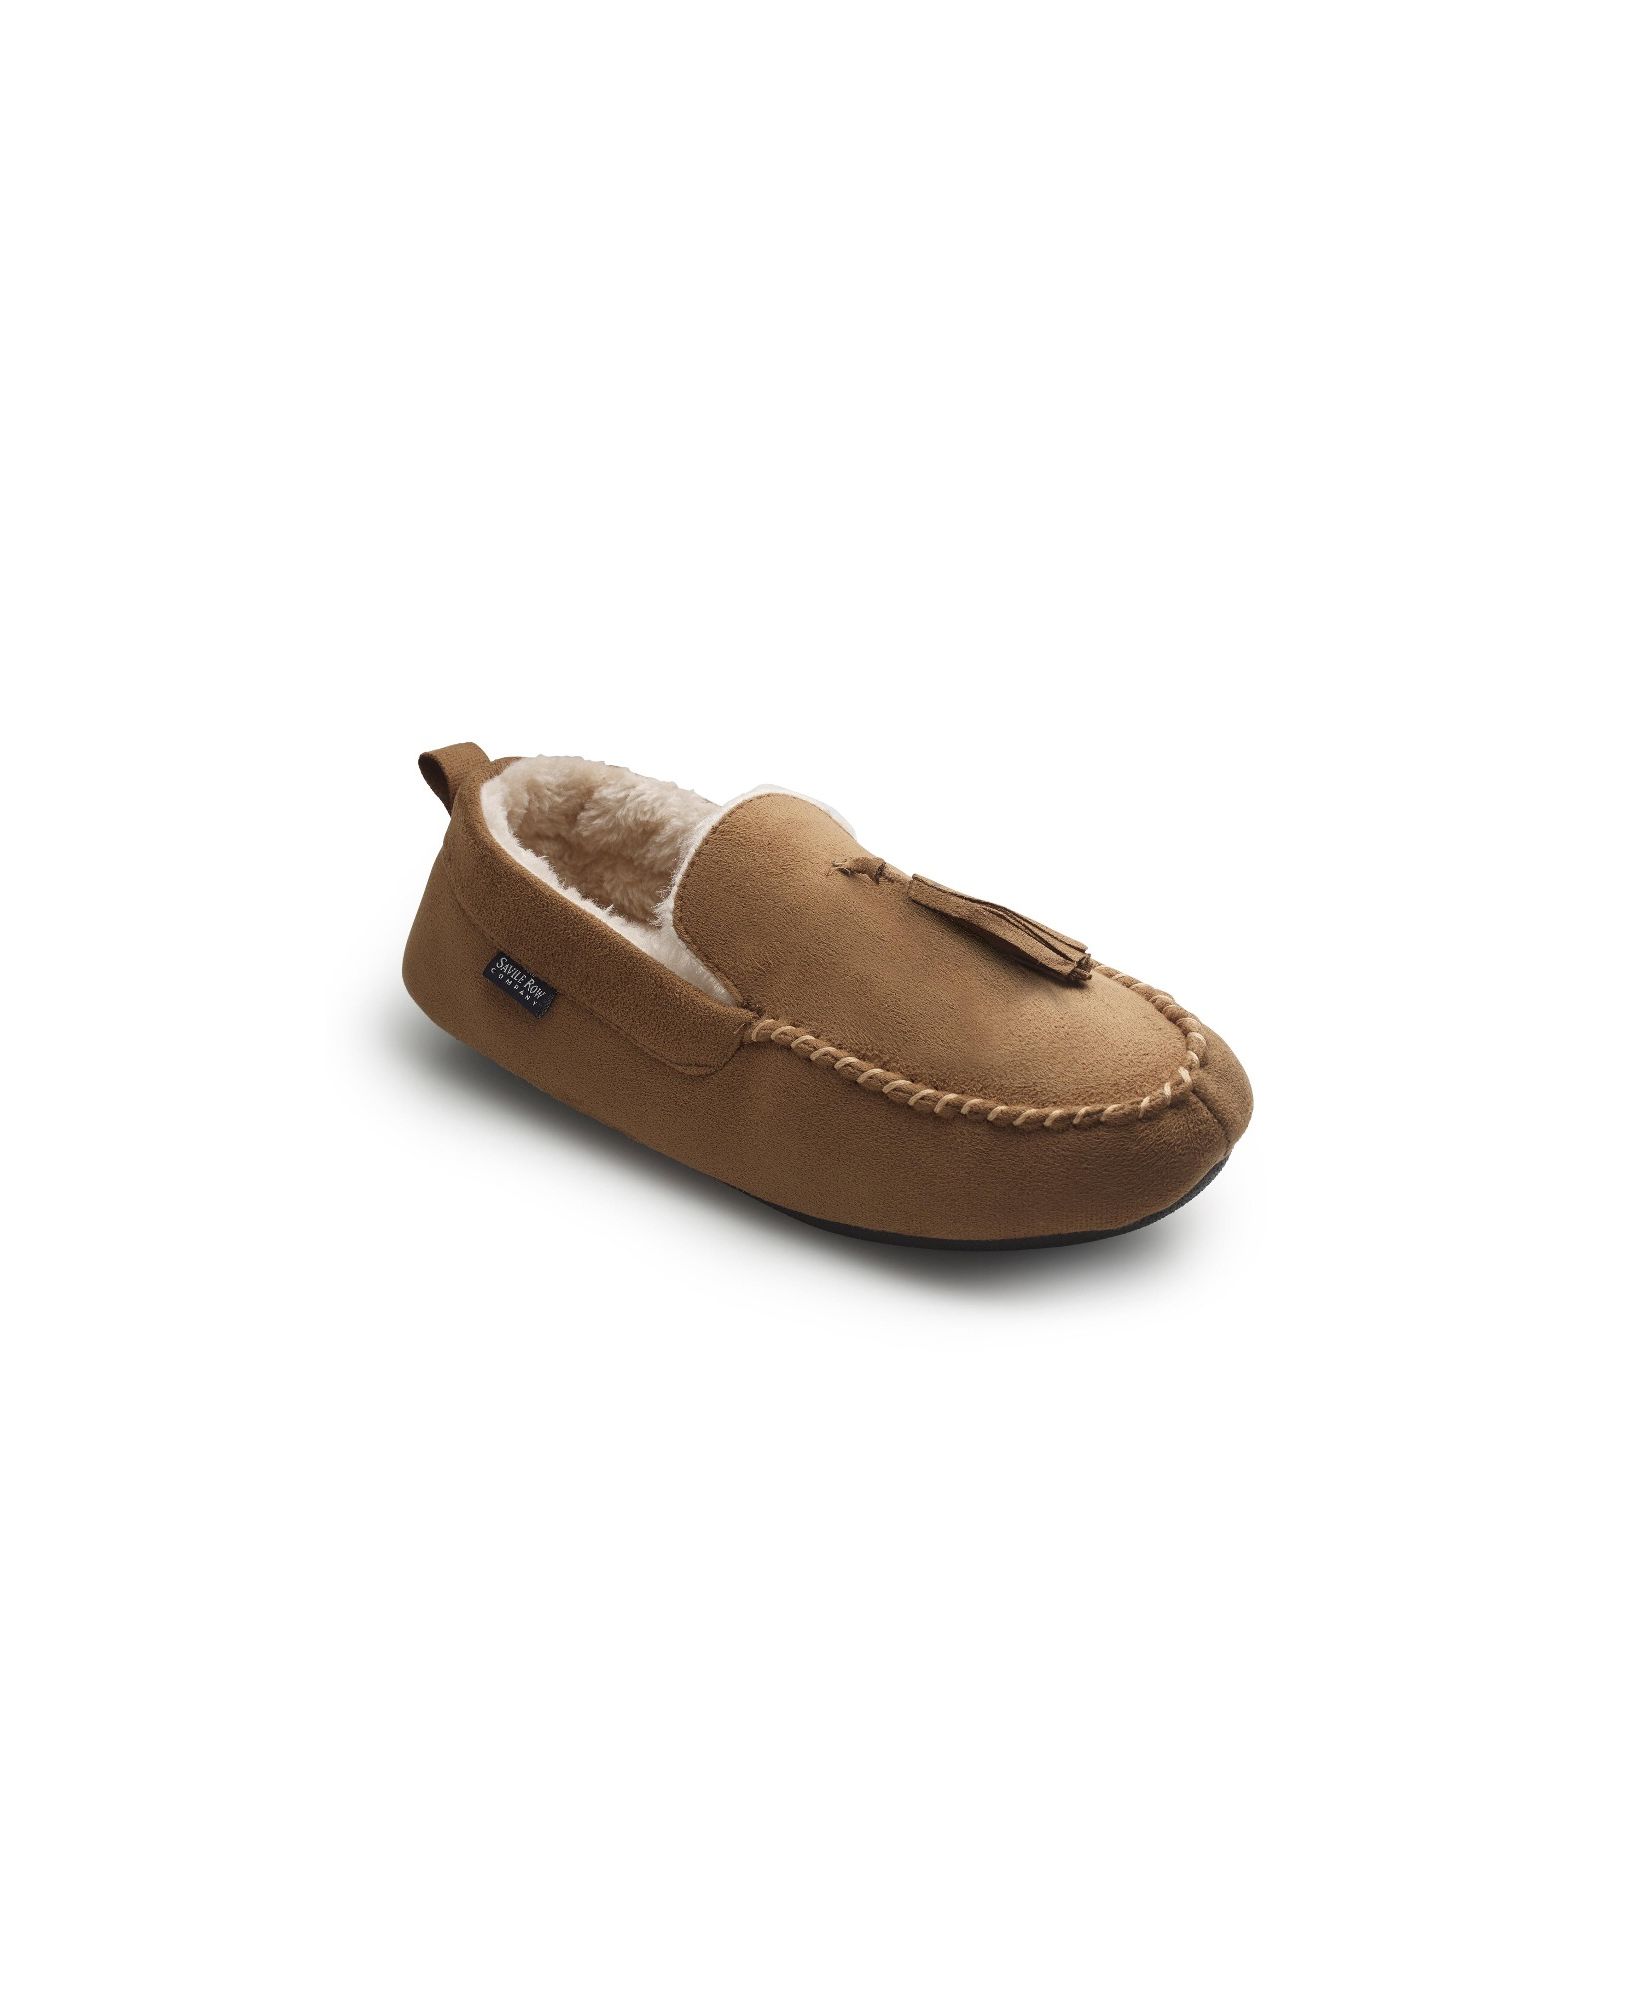 Tan Microsuede Moccasin Slippers 11